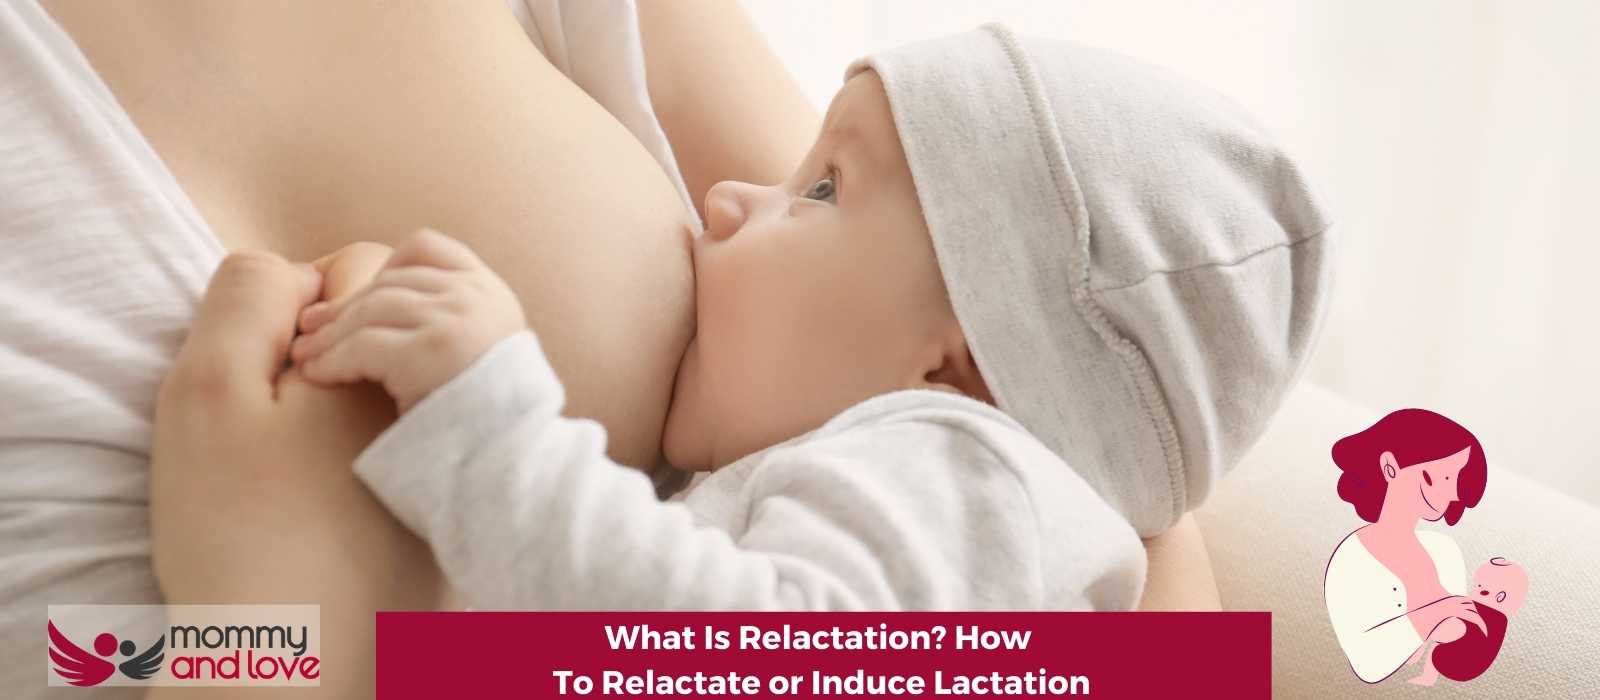 What Is Relactation How To Relactate or Induce Lactation